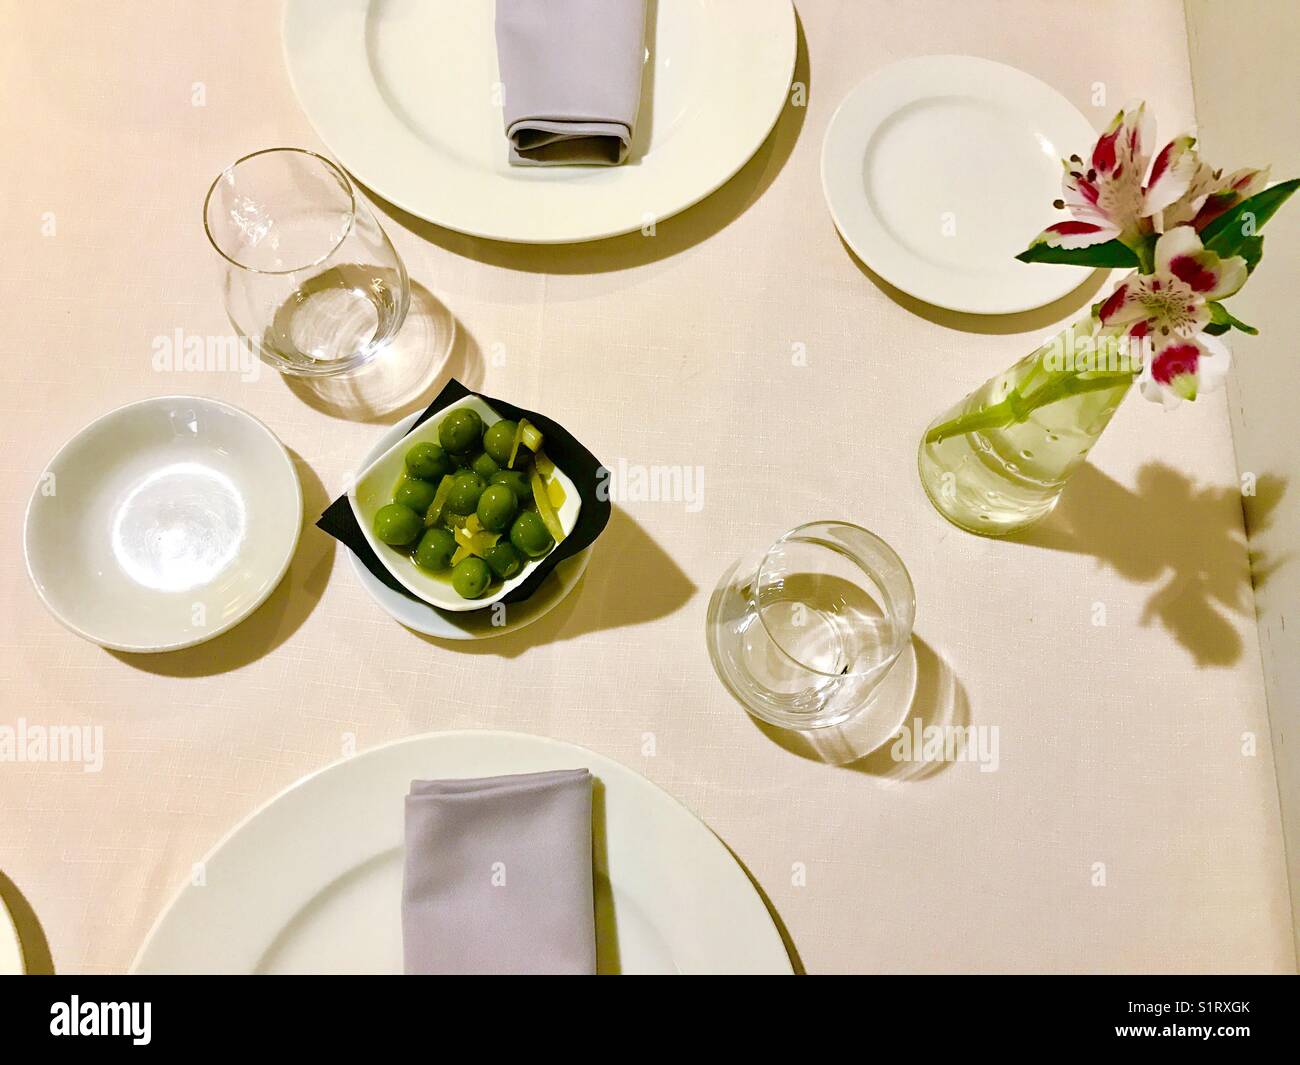 Set table. View from above. Stock Photo